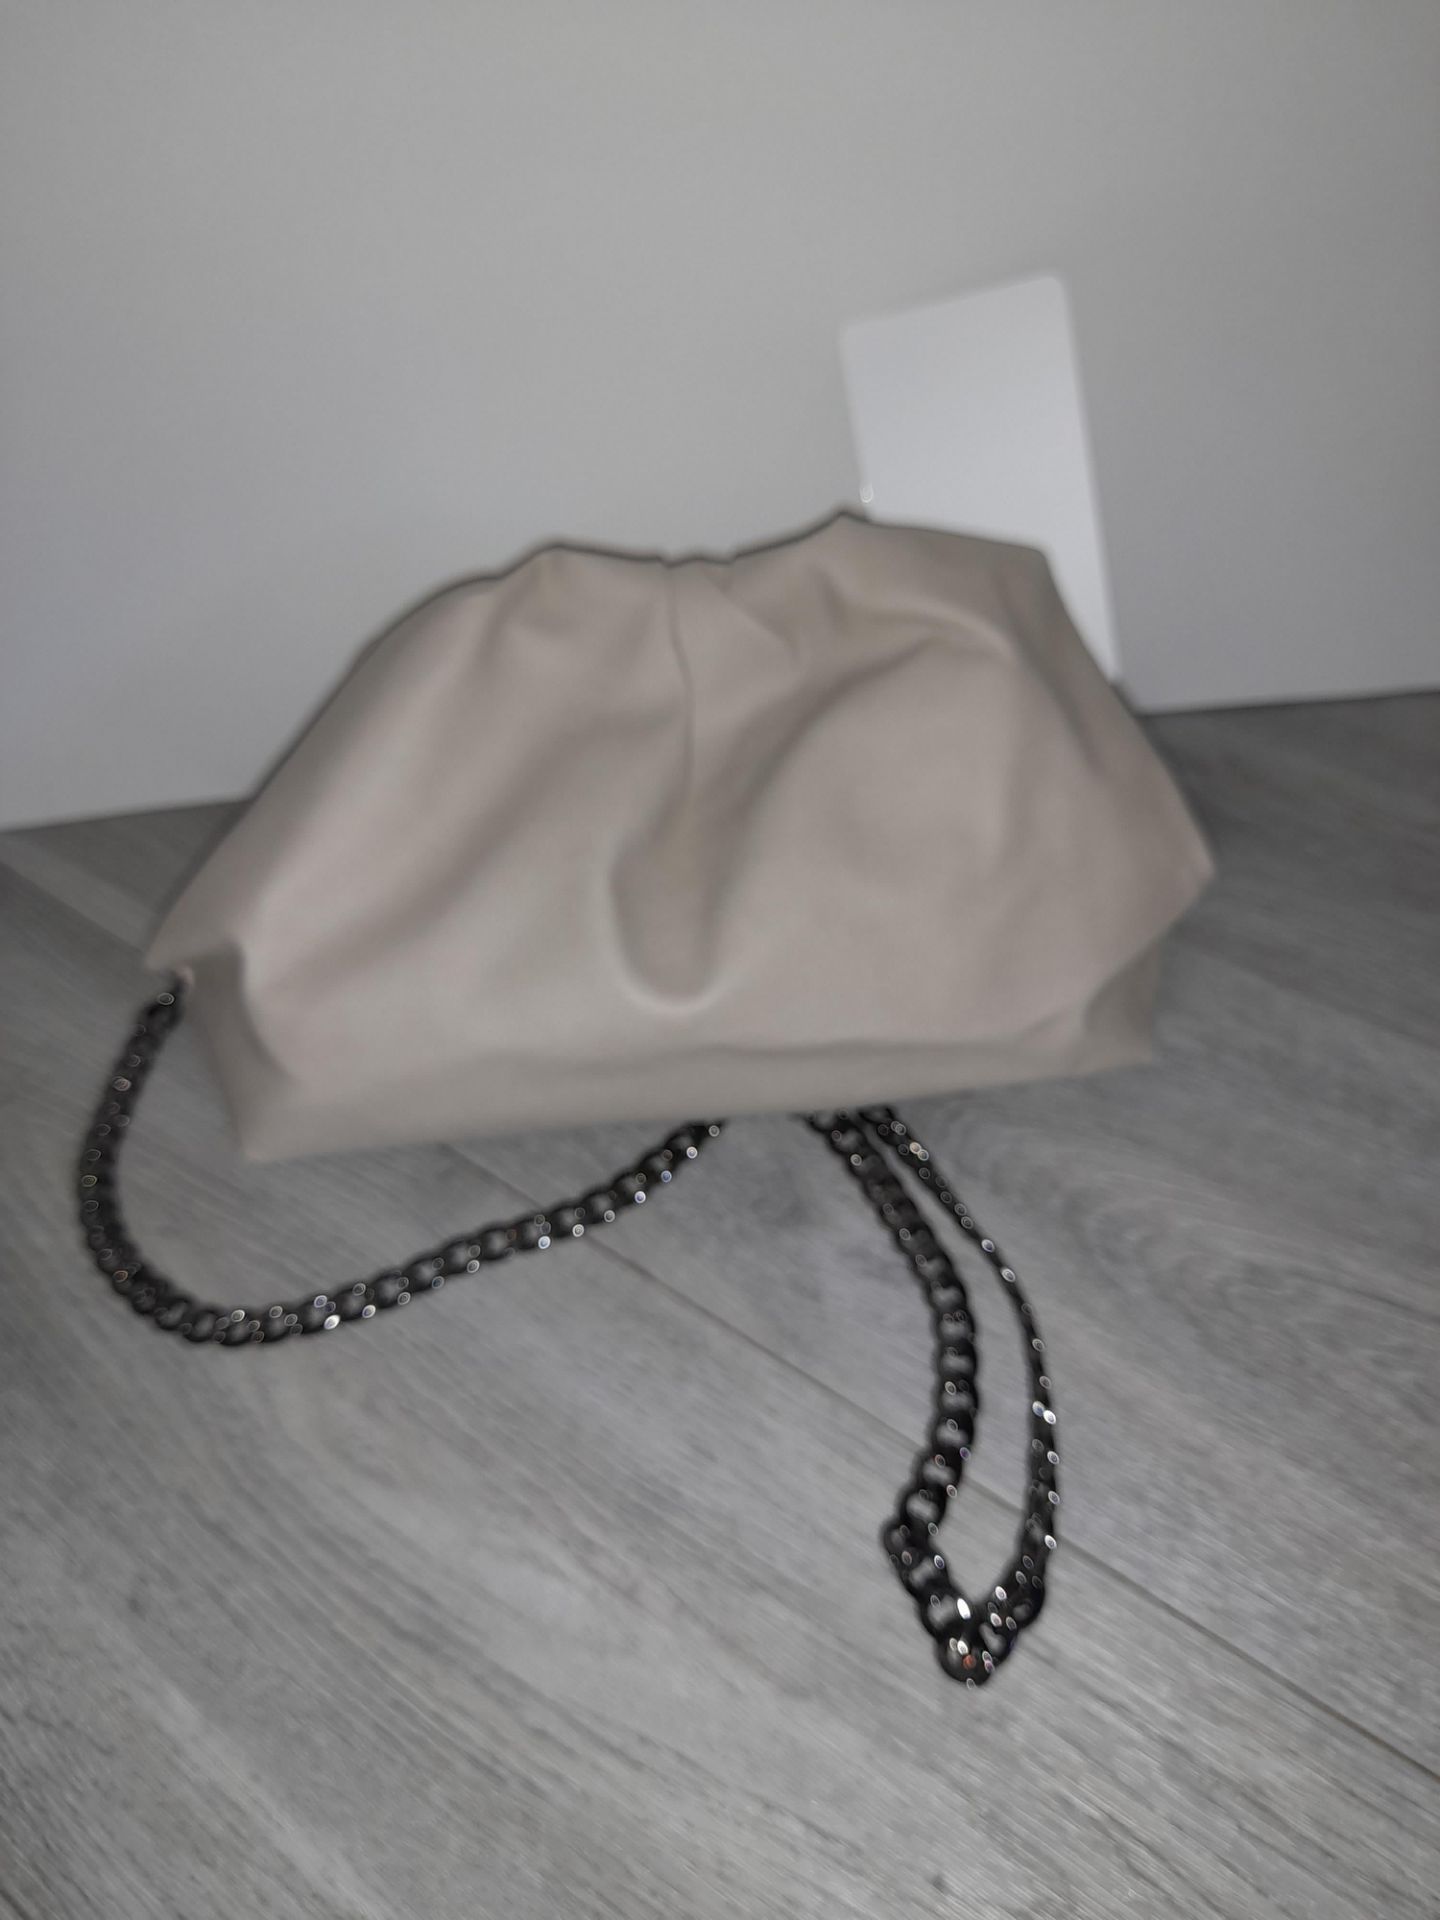 Maviya “Harmony Mini” Cream Small Slouchy Bag for Shoulder or Cross Body Wear with Faux Suede Lining - Image 2 of 3